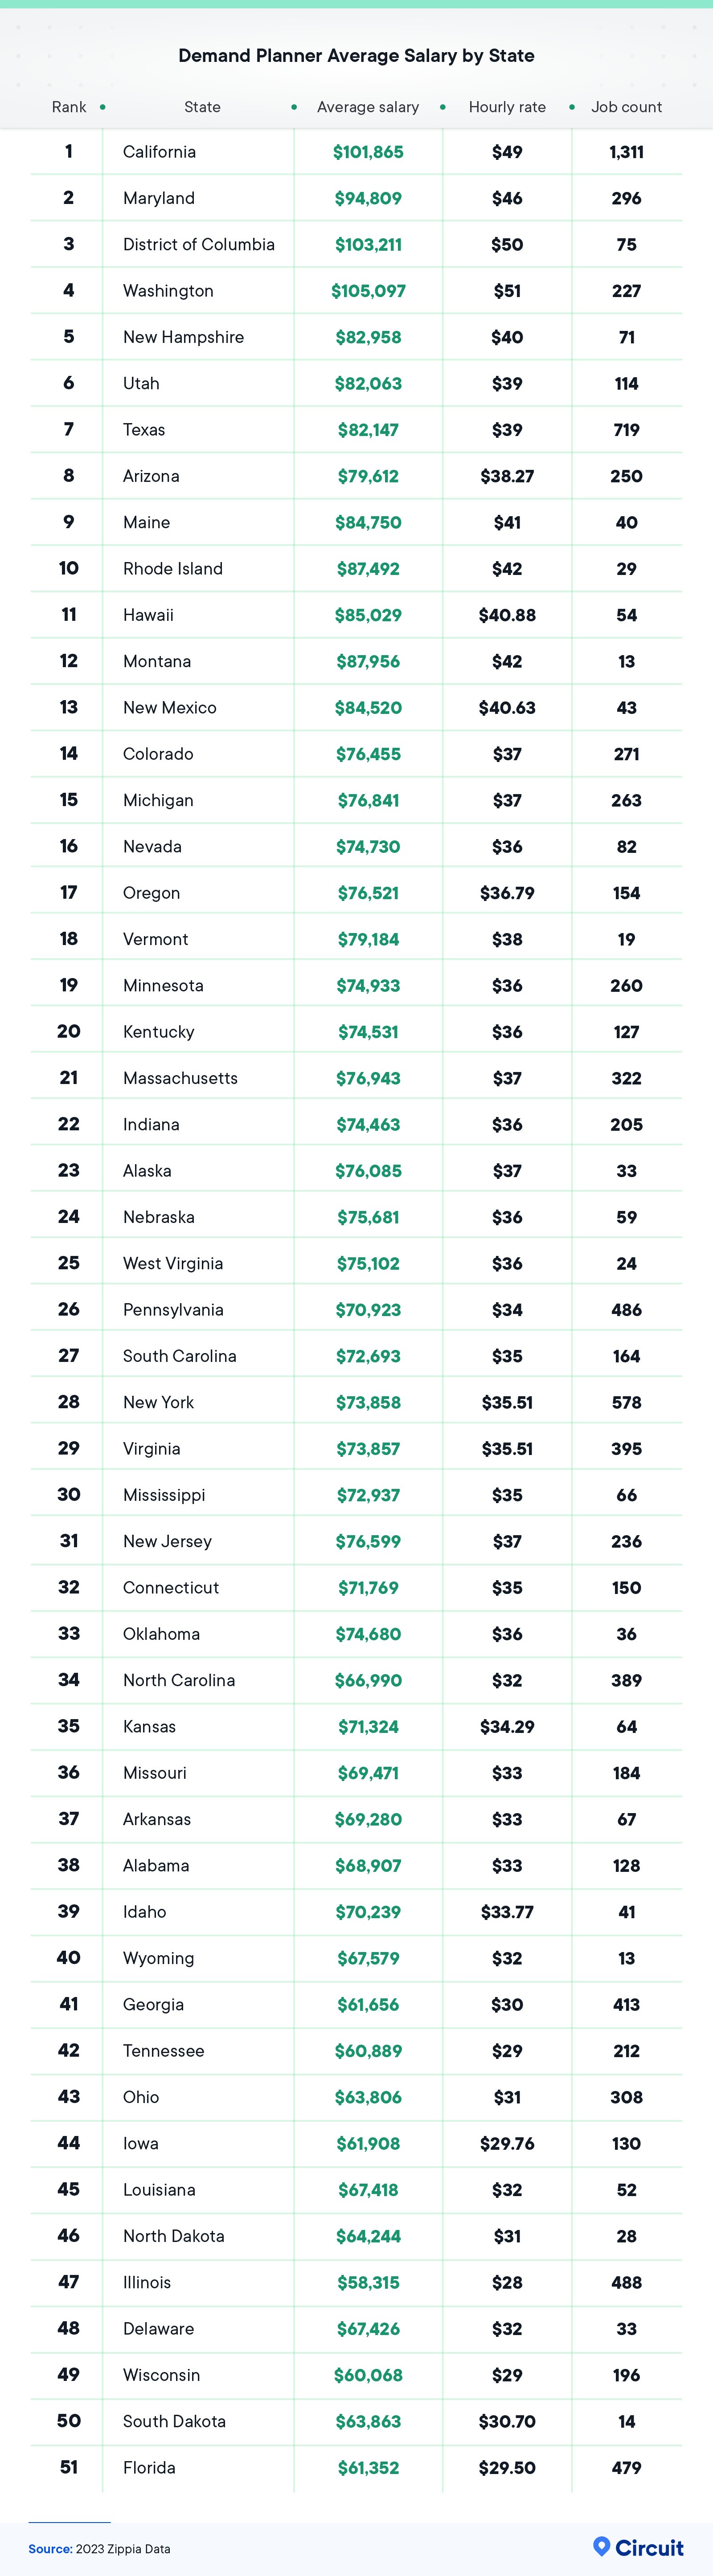 Demand planner average salary by state